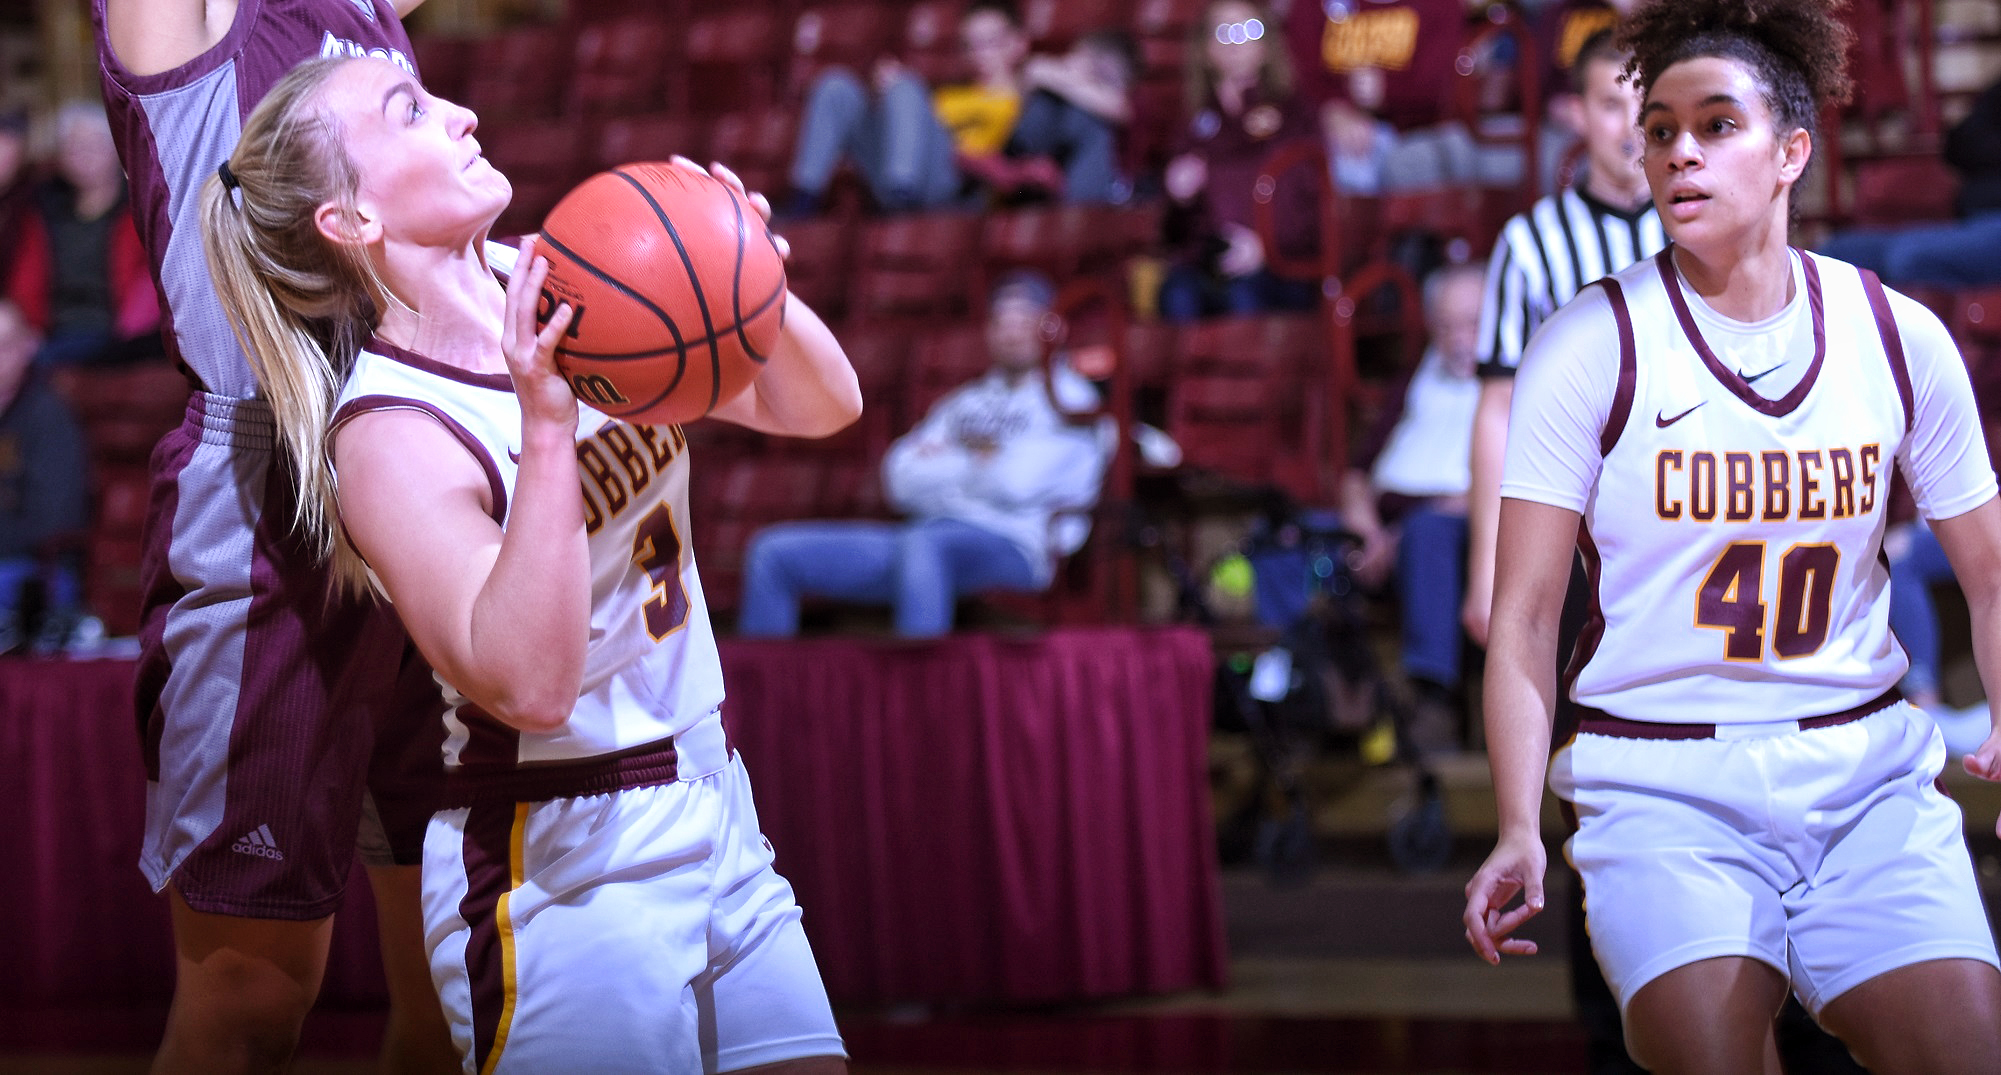 Autumn Thompson was one of four players who had at least 10 points in the Cobbers' win at St. Mary's. She had 14 points and added five rebounds and four assists.